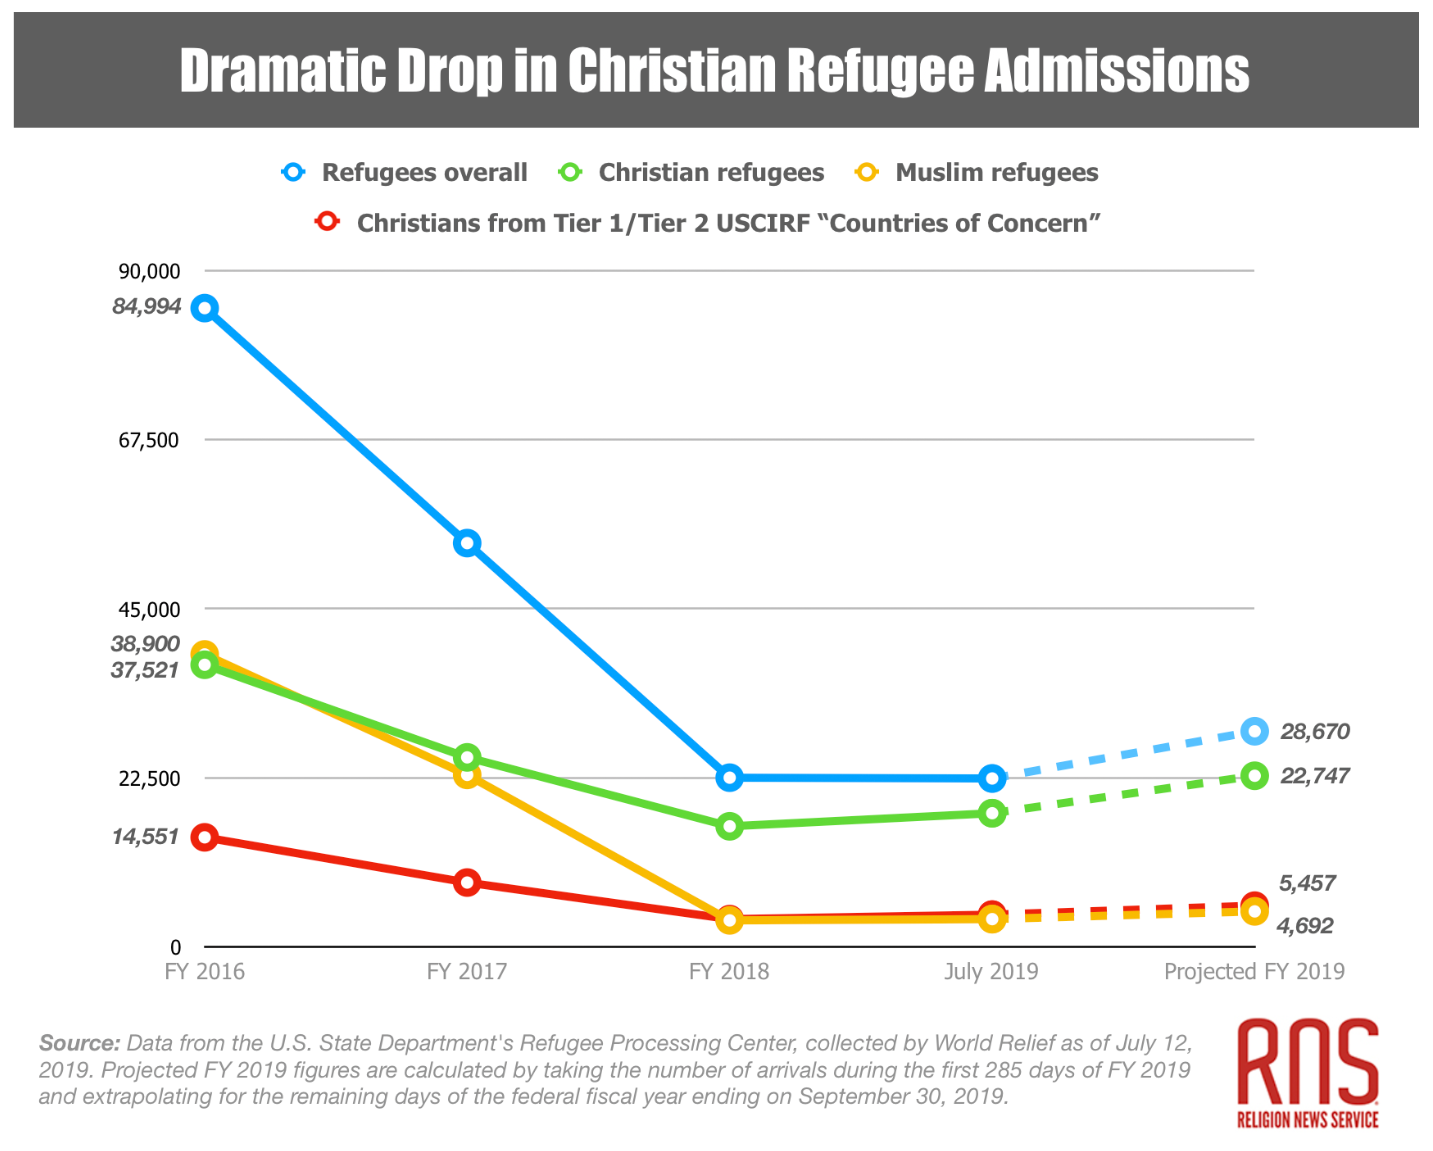 This graph shows a dramatic drop in Christian refugee admissions and refugees overall.